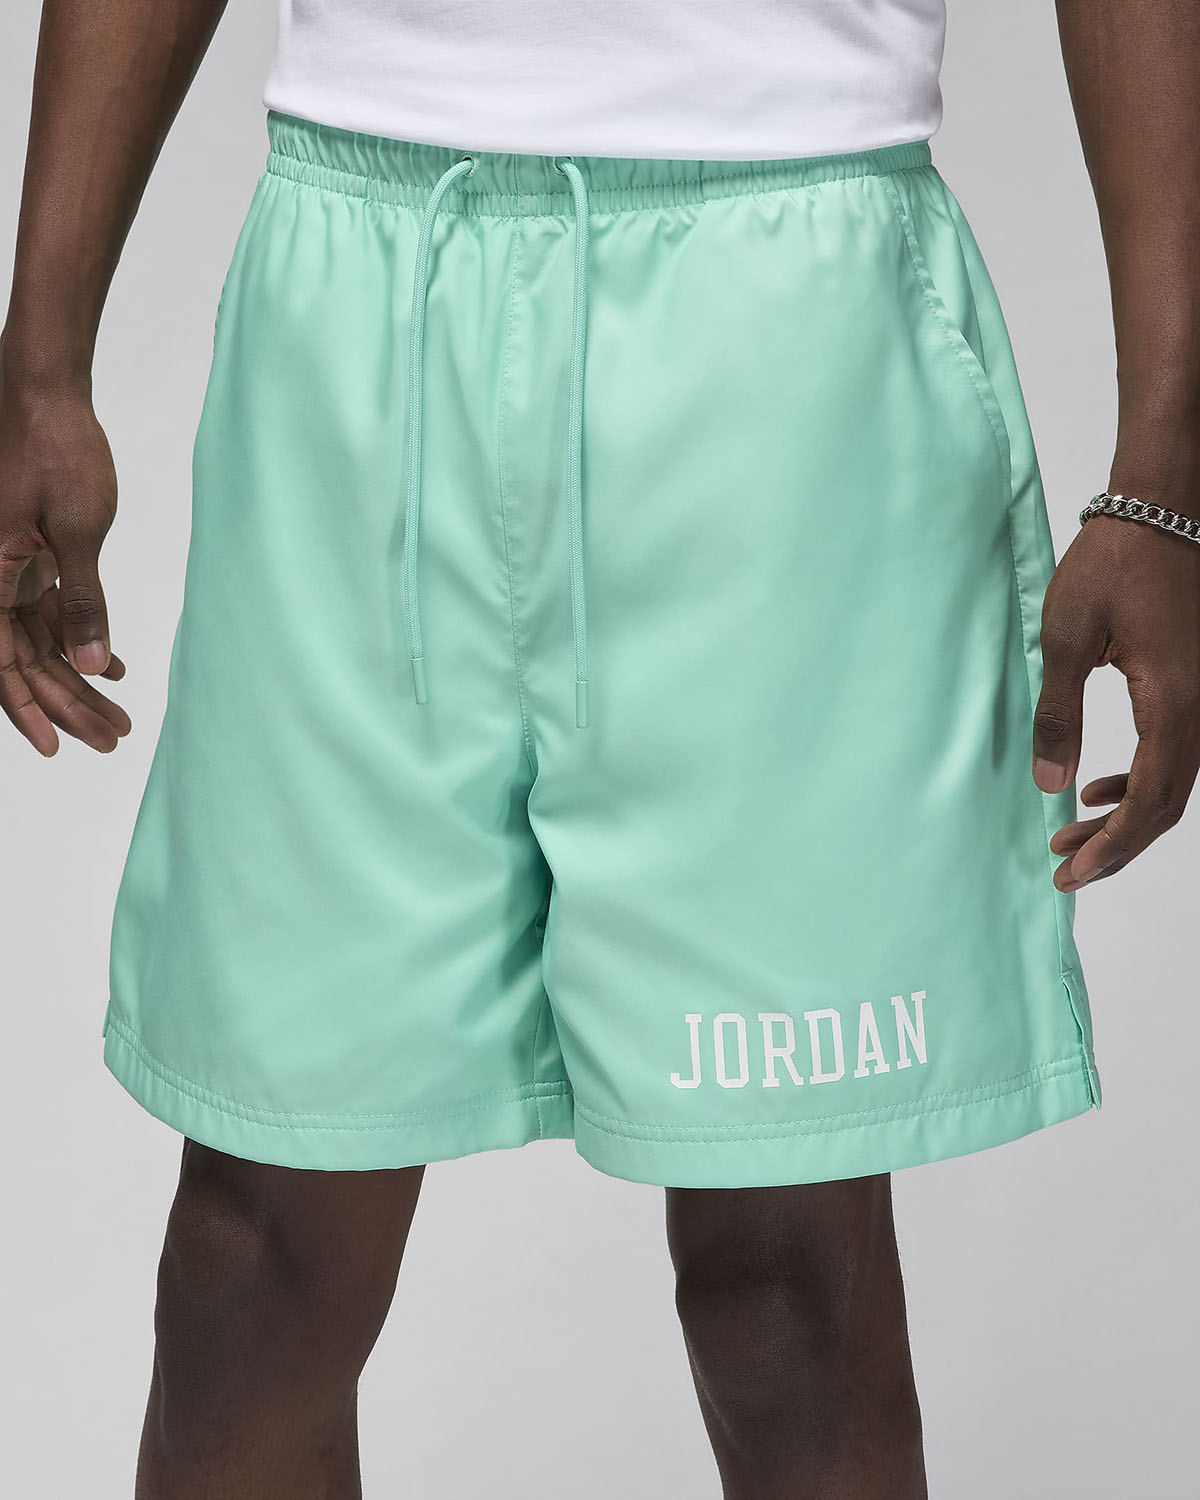 Jordan Brands Feng Shui Collection Highlights The Past Emerald Rise 2